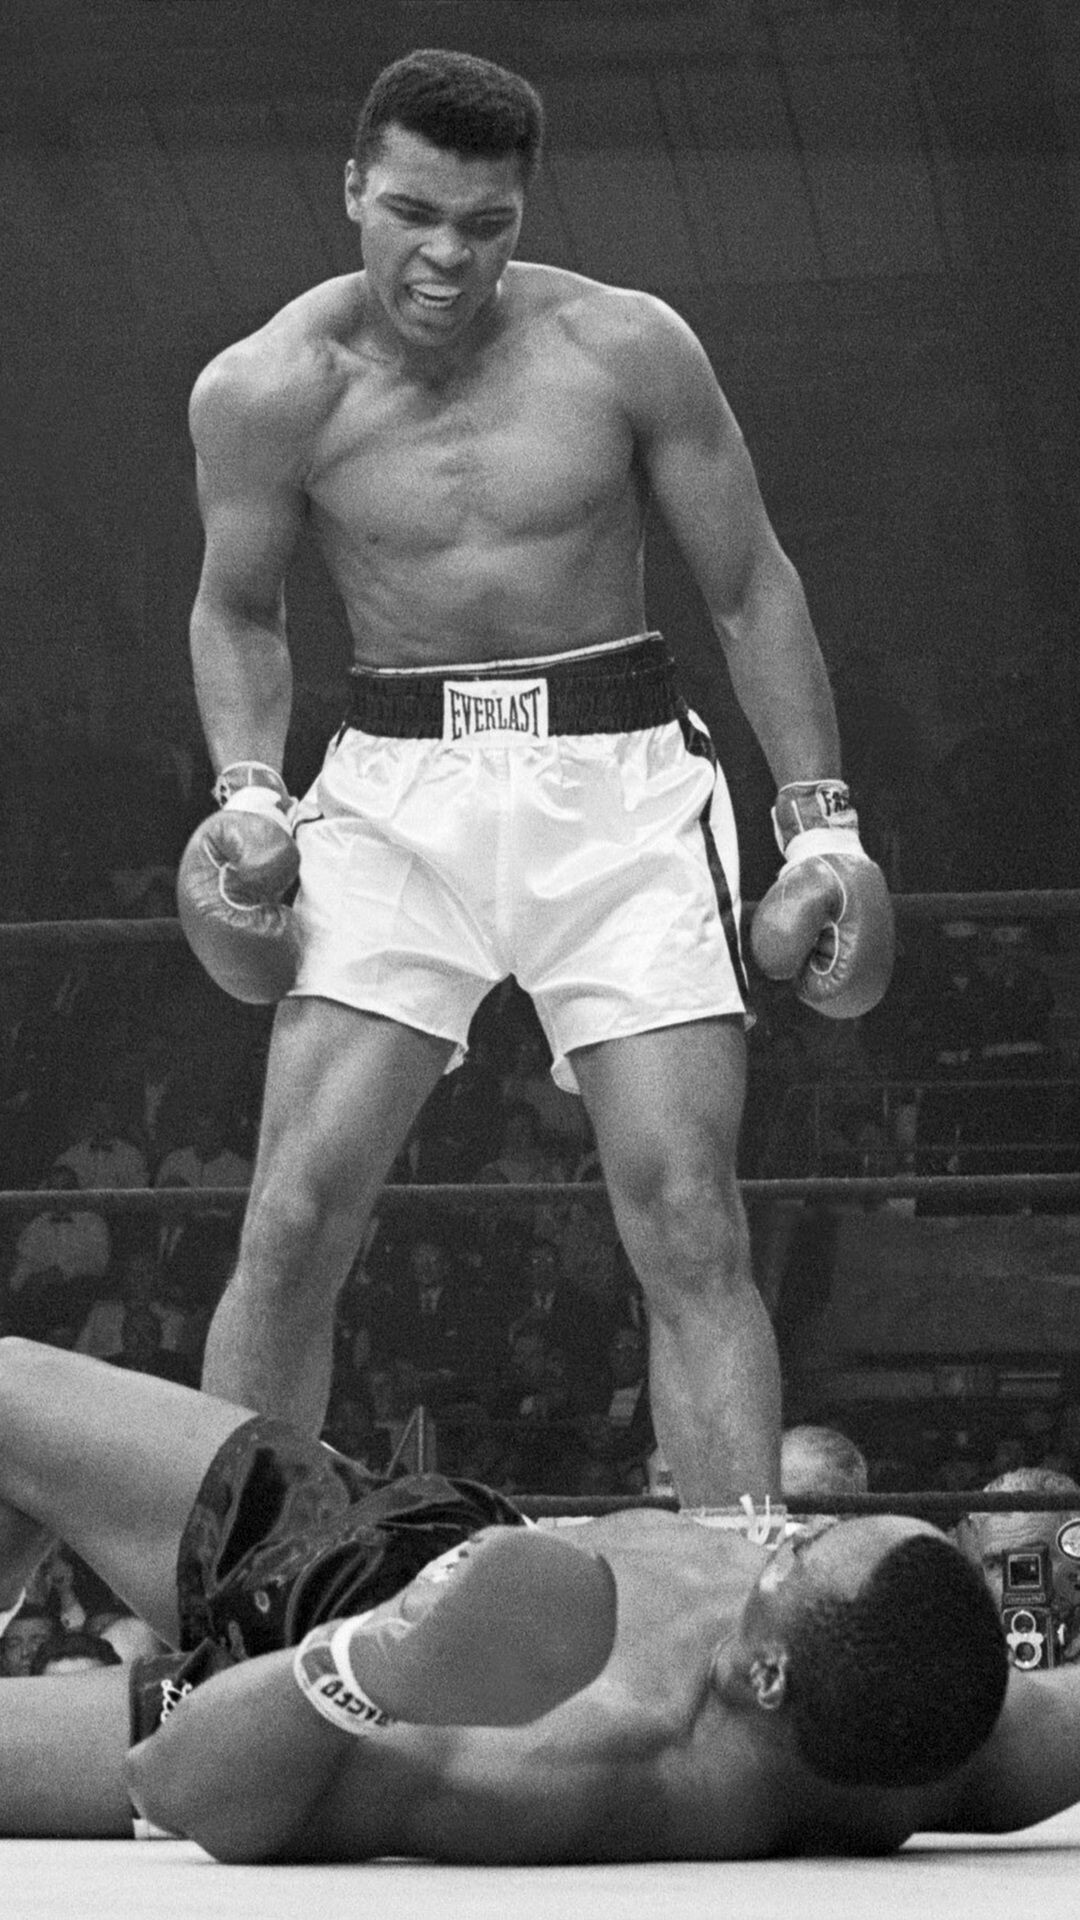 Muhammad Ali: Sonny Liston, He fought Joe Frazier for the second time on January 28, 1974. 1080x1920 Full HD Wallpaper.